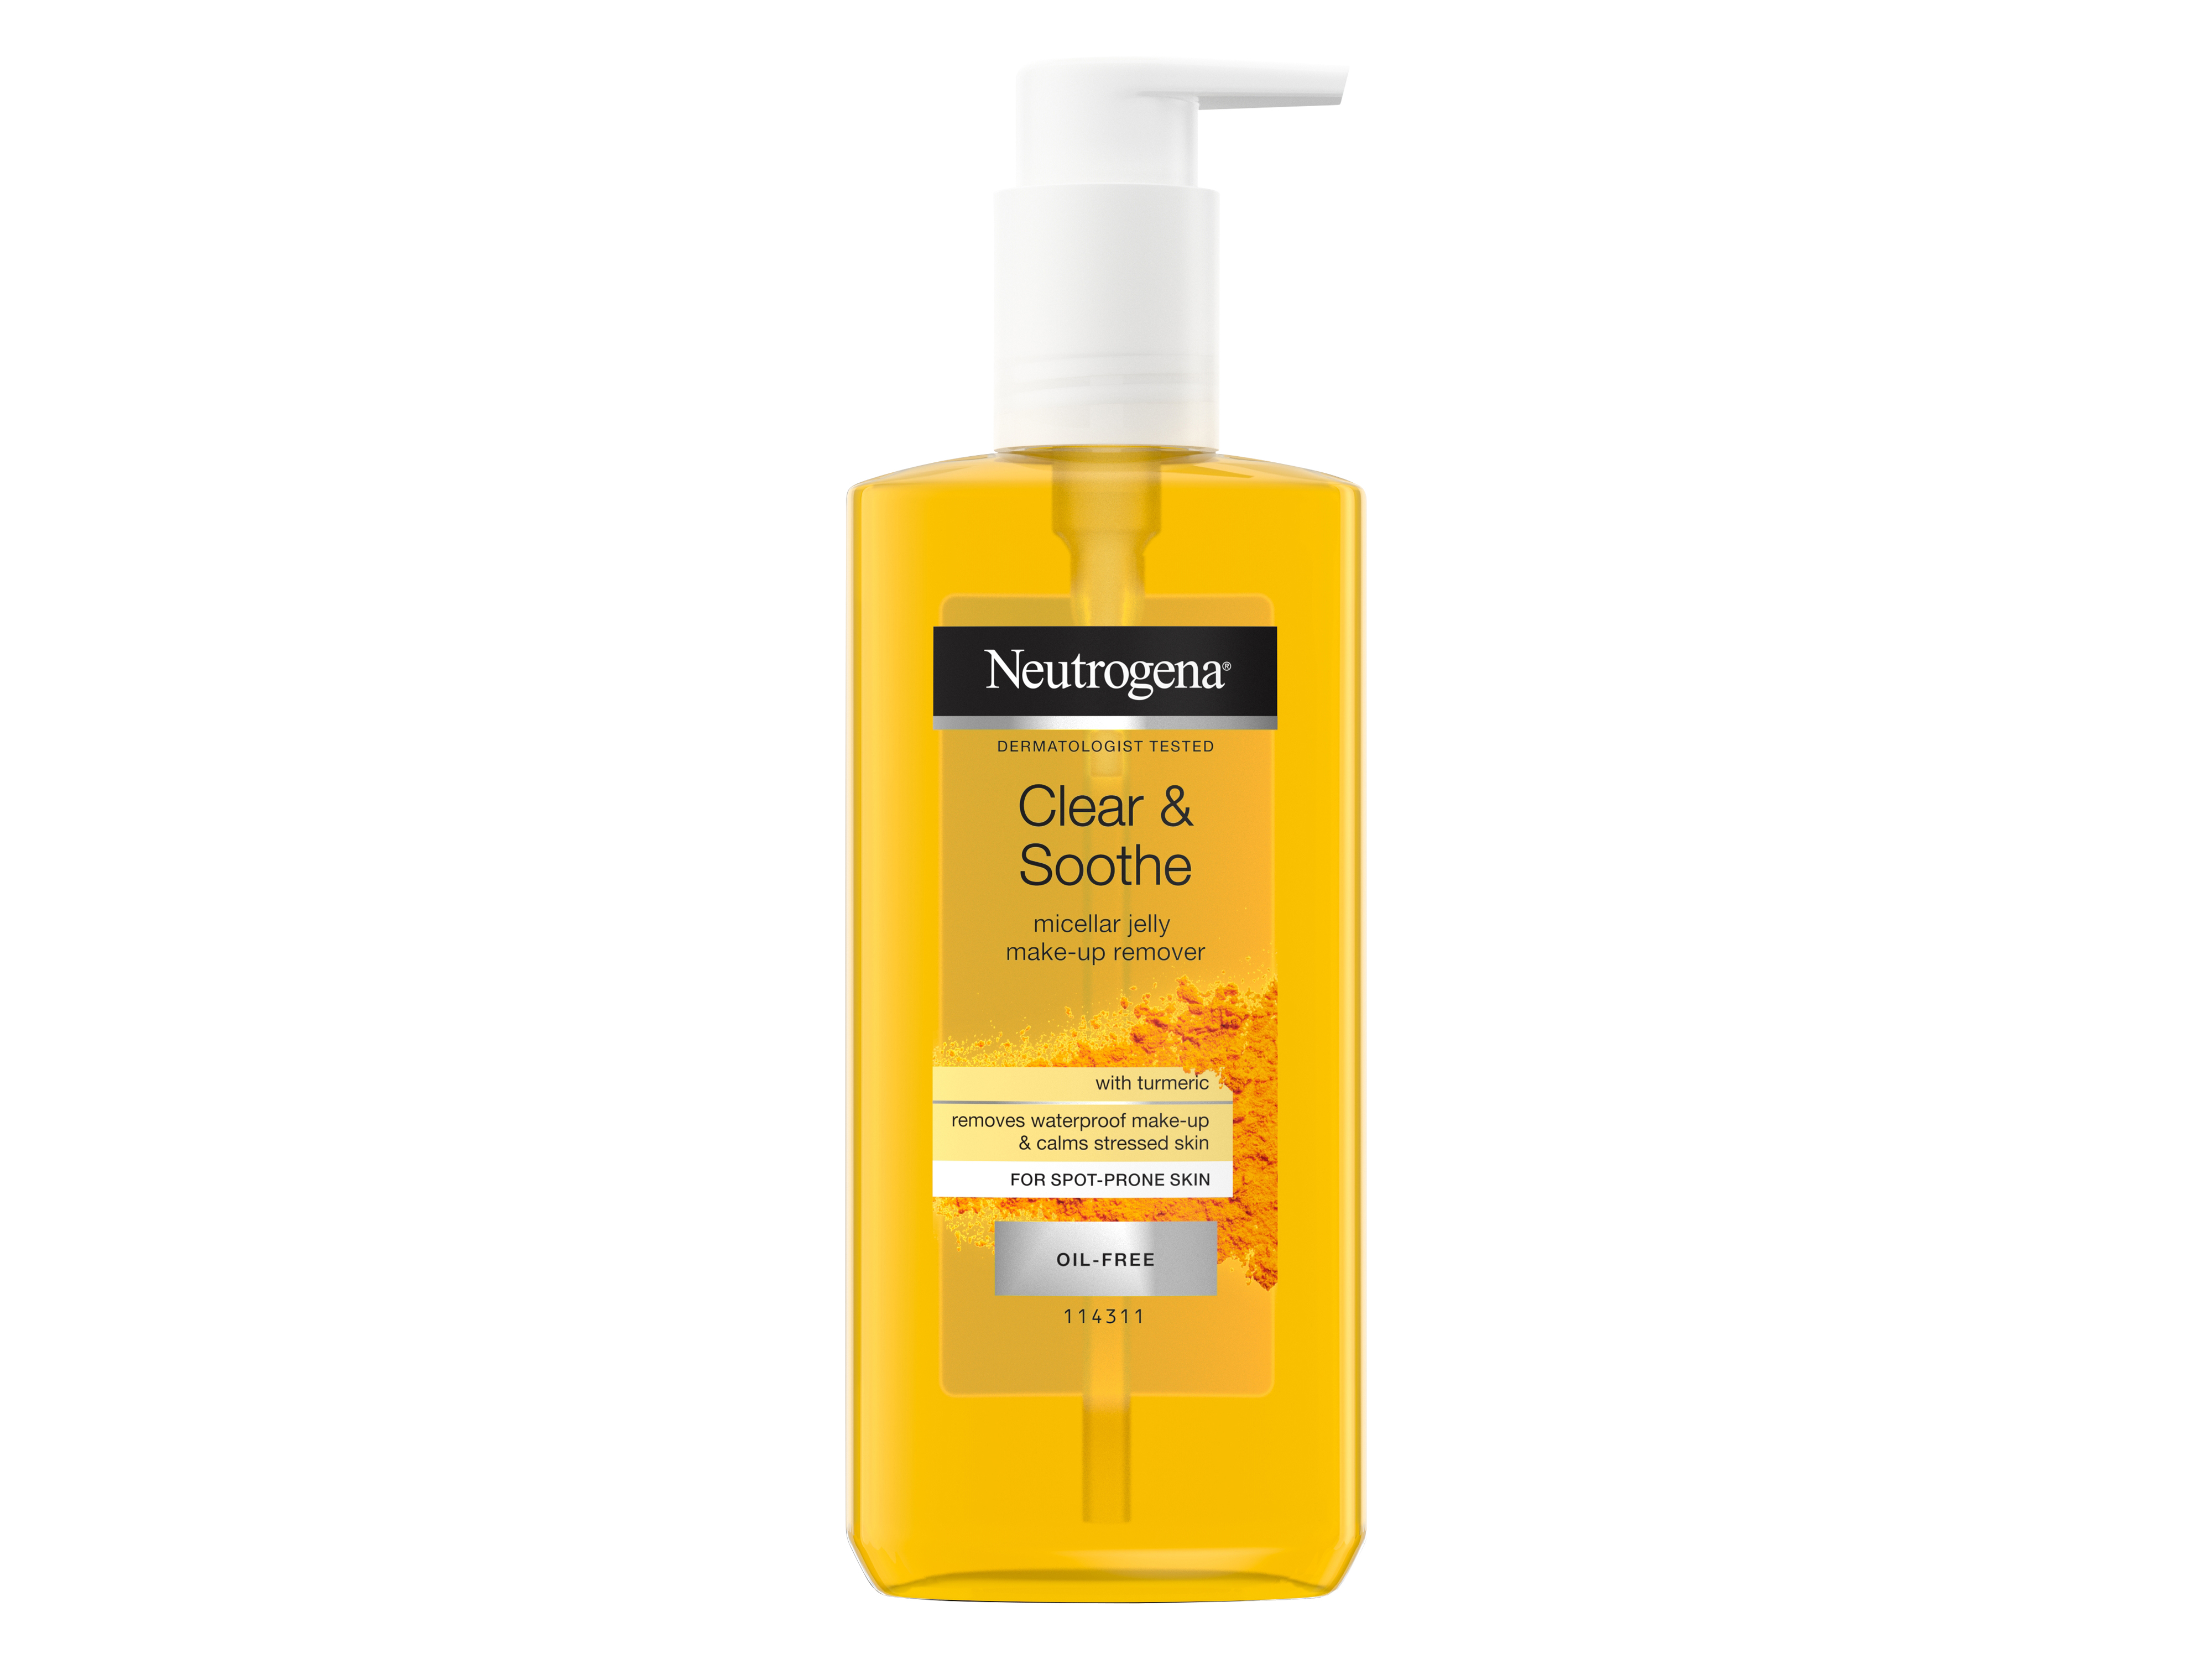 Neutrogena Clear & Soothe Micellar Jelly Make-up Remover, 200 ml